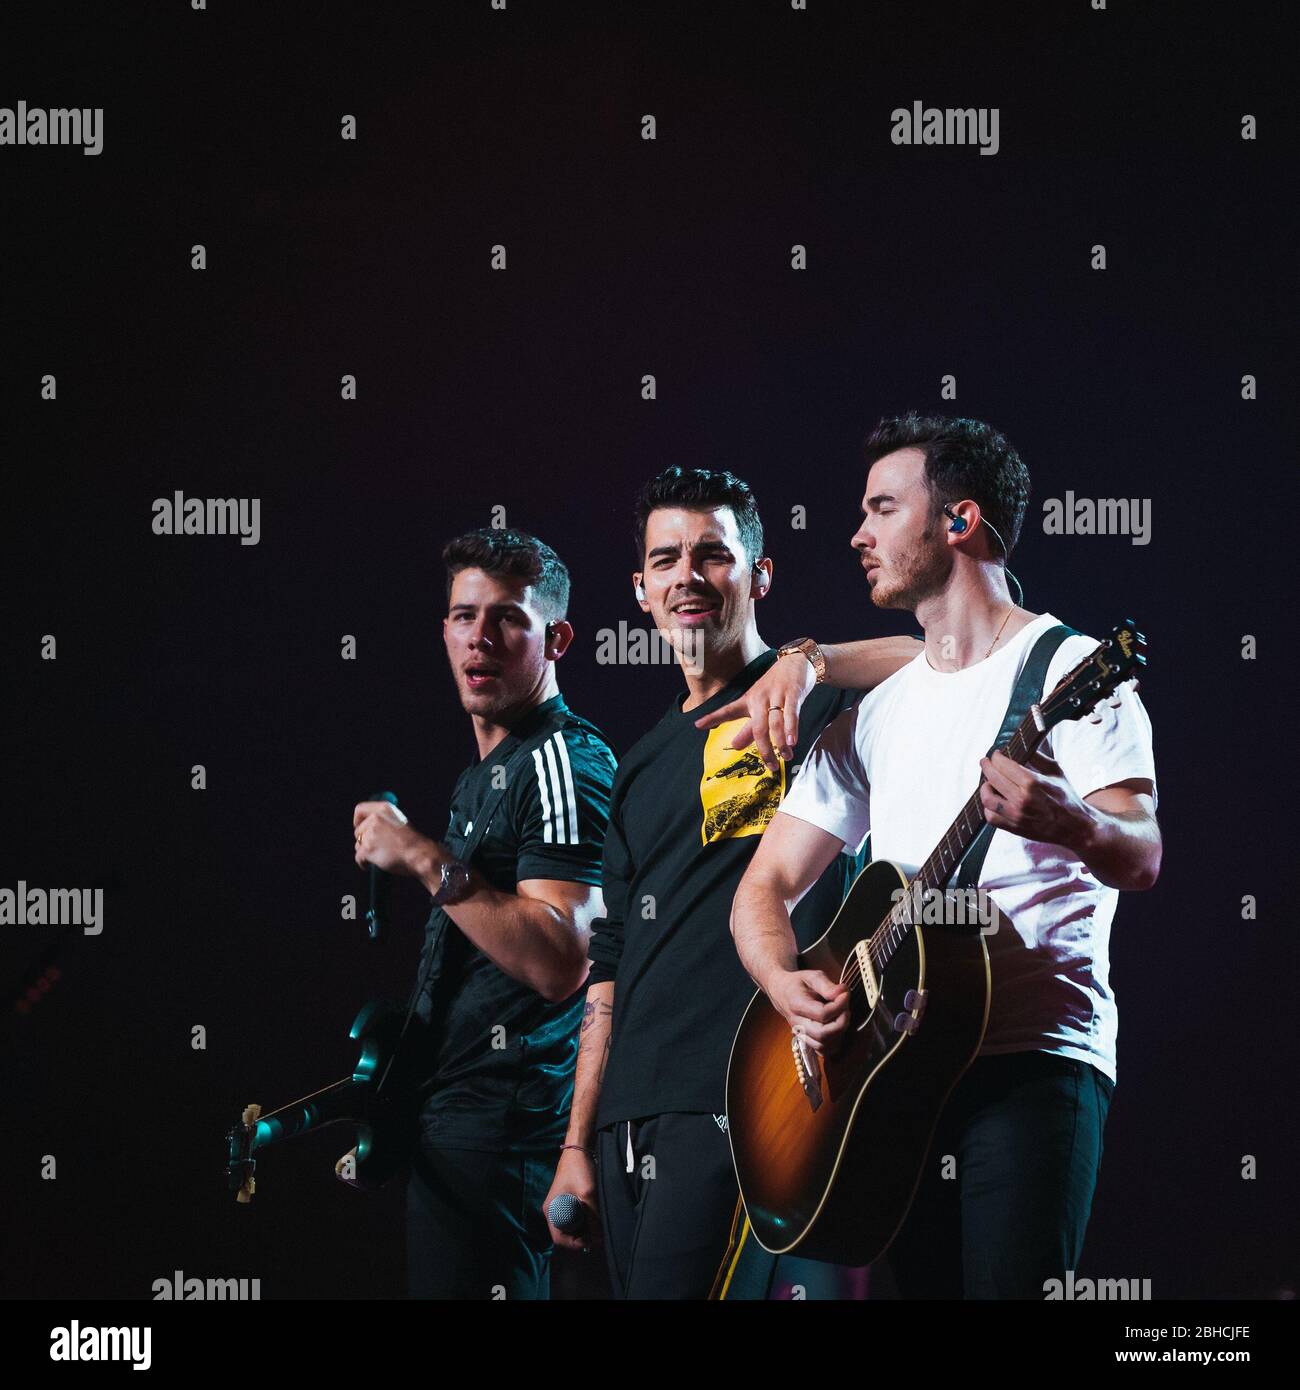 RELEASE DATE: April 24, 2020 TITLE: Happiness Continues STUDIO: Amazon DIRECTOR: Anthony Mandler PLOT: A live concert experience and exclusive look into life on the road with the Jonas Brothers during their sold out 'Happiness Begins' concert tour in 2019. STARRING: KEVIN JONAS, JOE JONAS, NICK JONAS. (Credit Image: © Amazon/Entertainment Pictures) Stock Photo